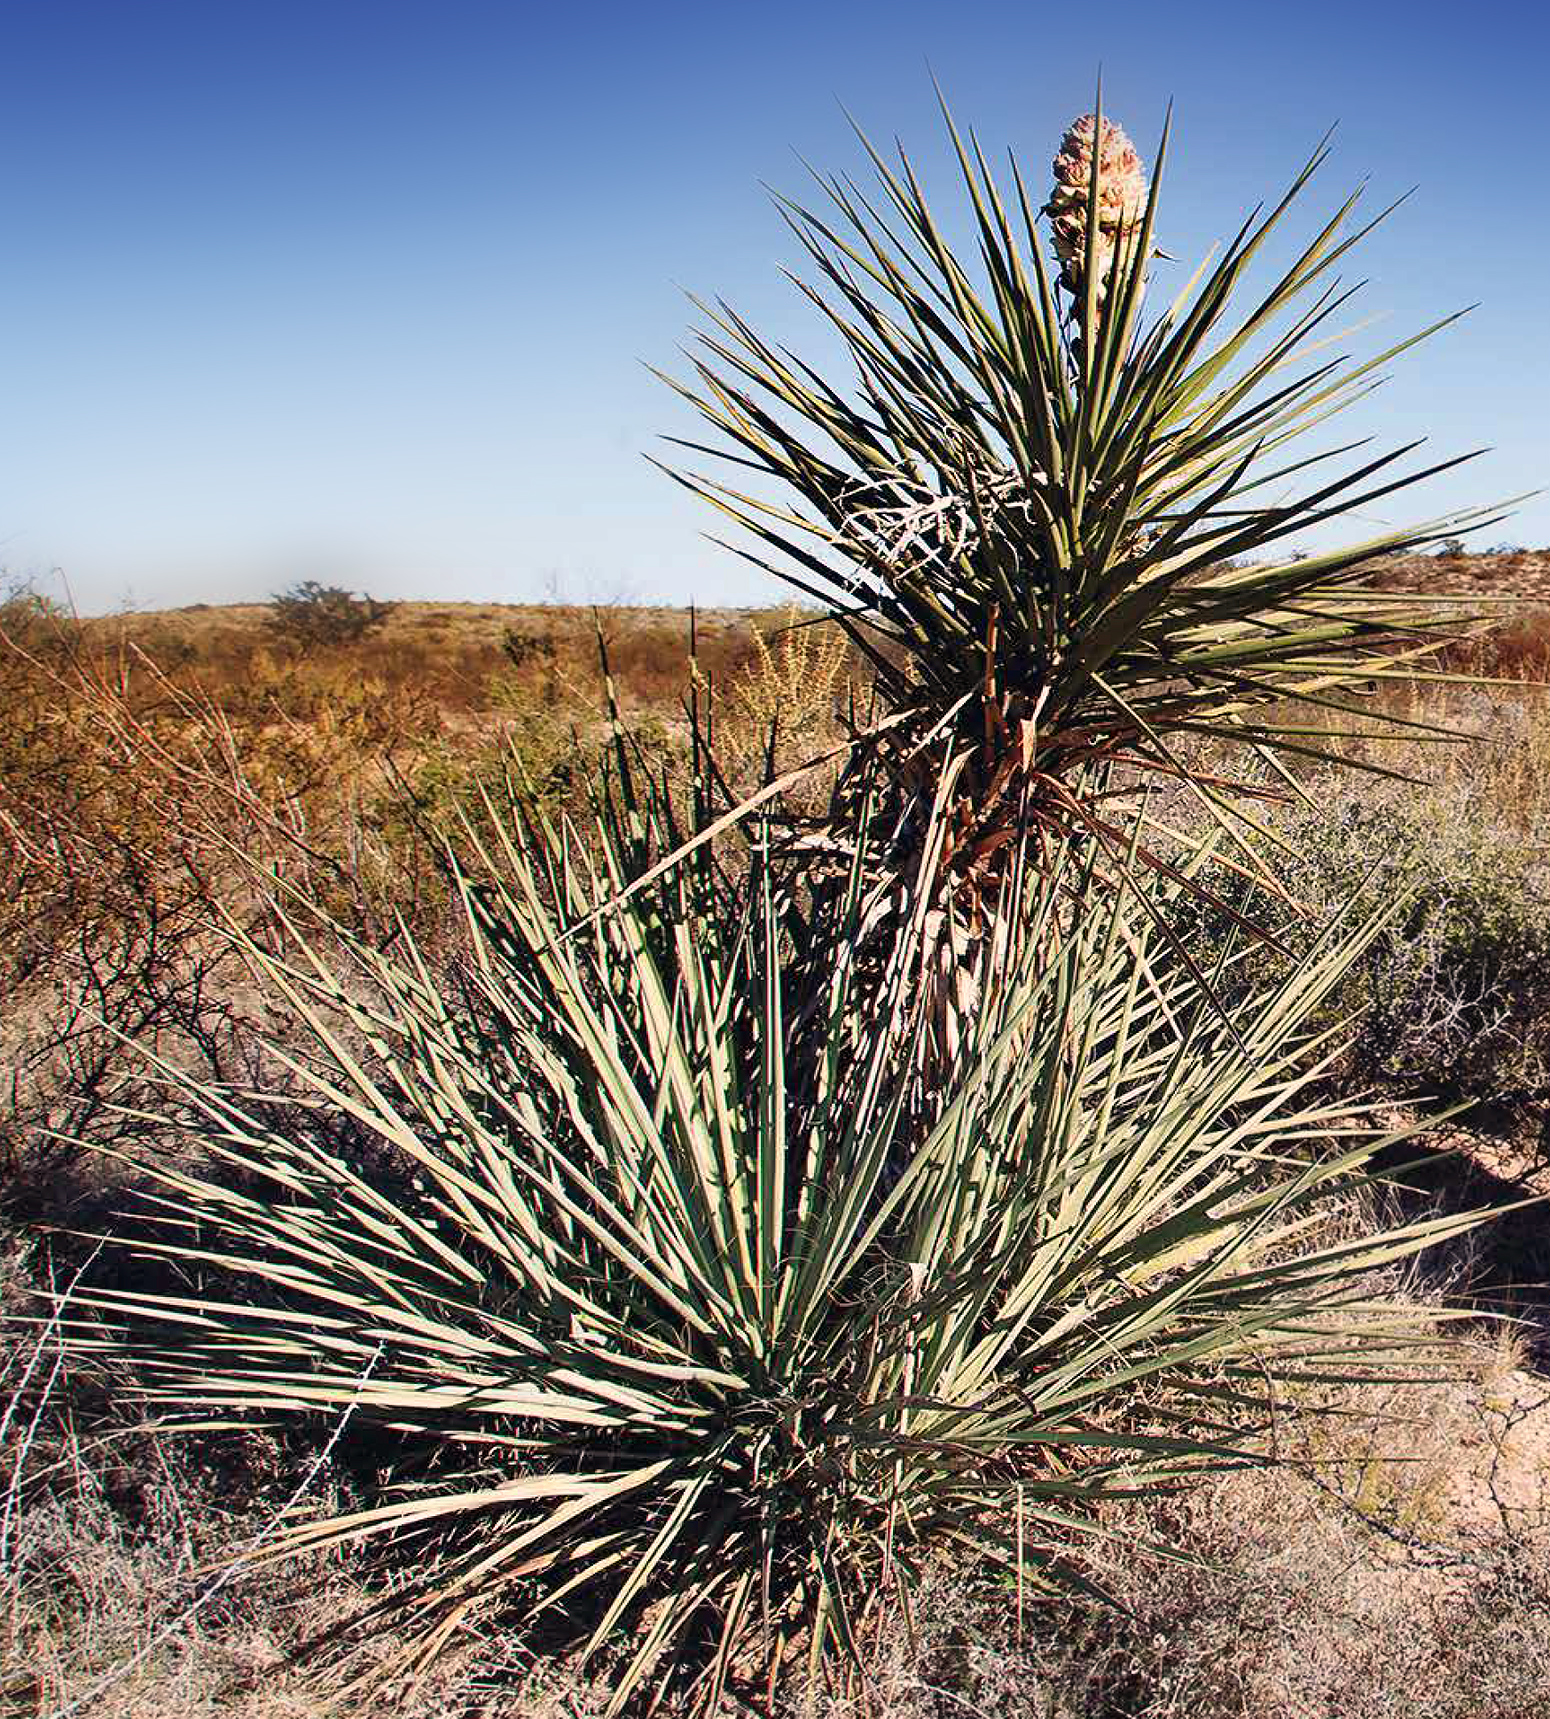 Yucca (Yucca glauca), commonly referred to as soap root